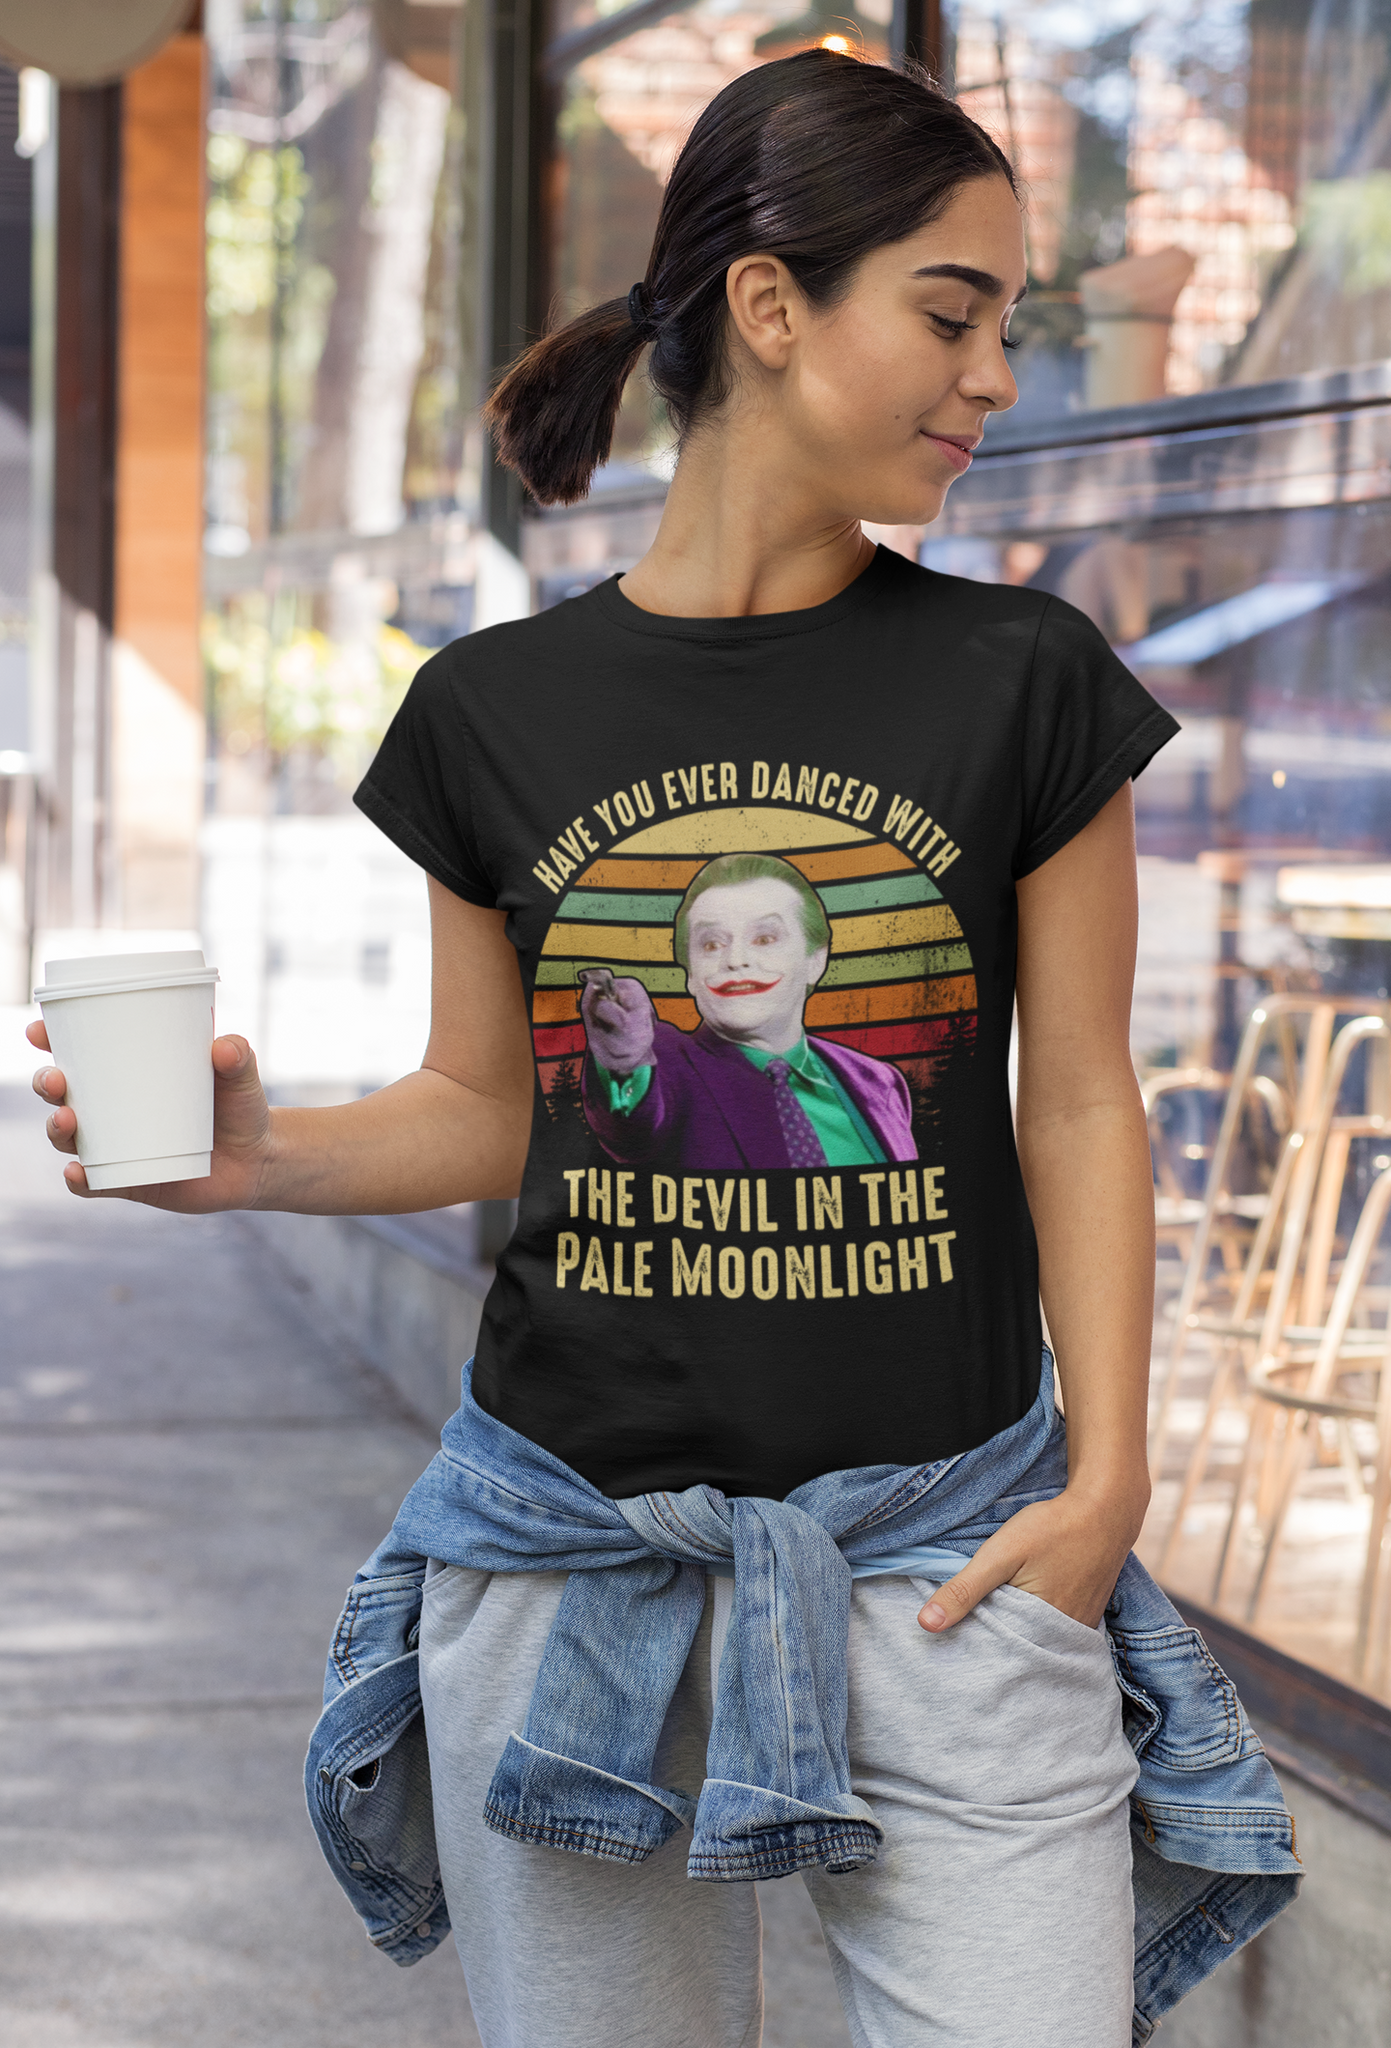 Joker Vintage T Shirt, Joker The Clown T Shirt, Have You Ever Danced With The Devil In The Pale Moonlight Tshirt, Halloween Gifts